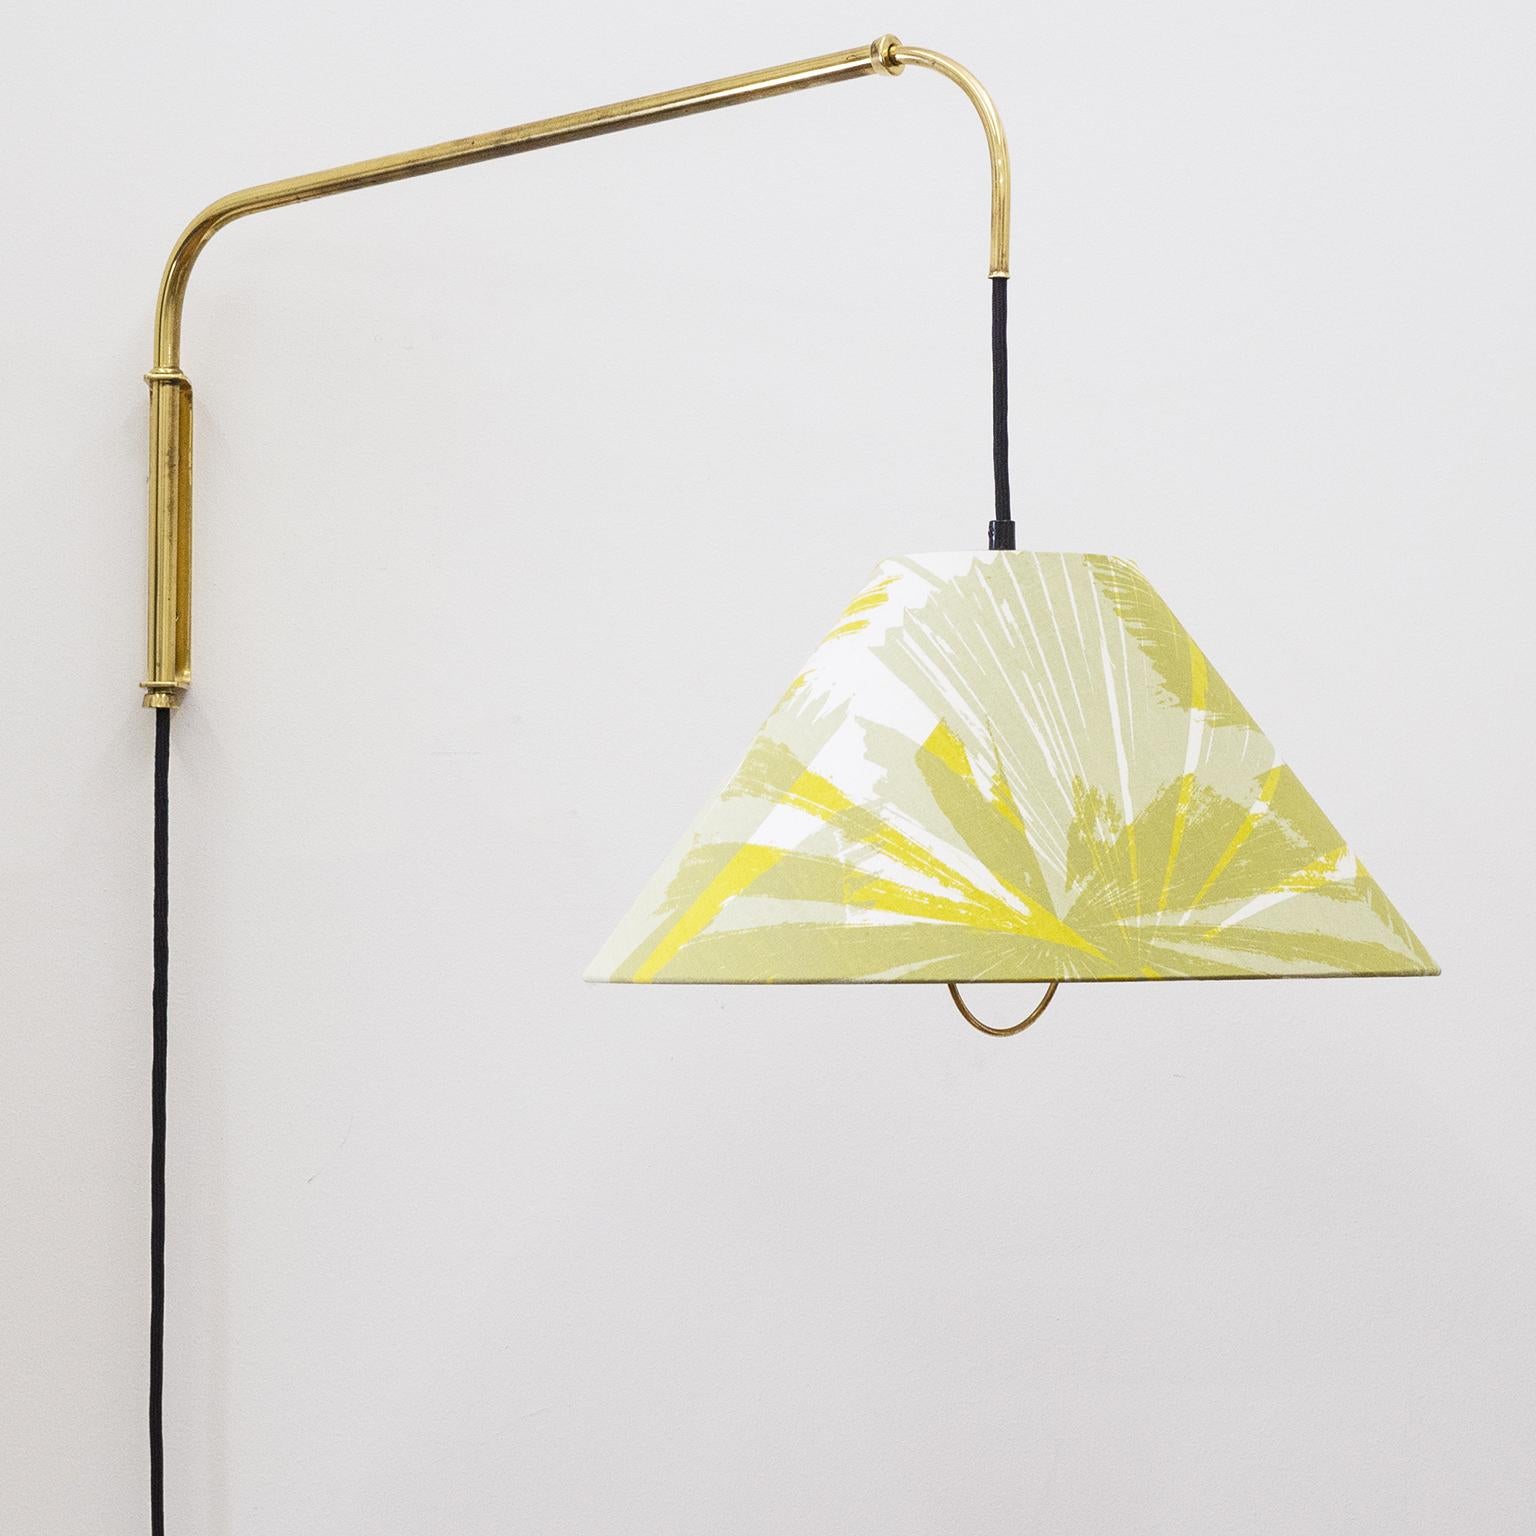 Rare large telescopic swing-arm wall light by J.T. Kalmar, circa 1950. The all brass arm can be extended and swiveled and the shade can be adjusted up-and-down by means of a brass grip on the shade and a solid brass counterweight on the cord. This